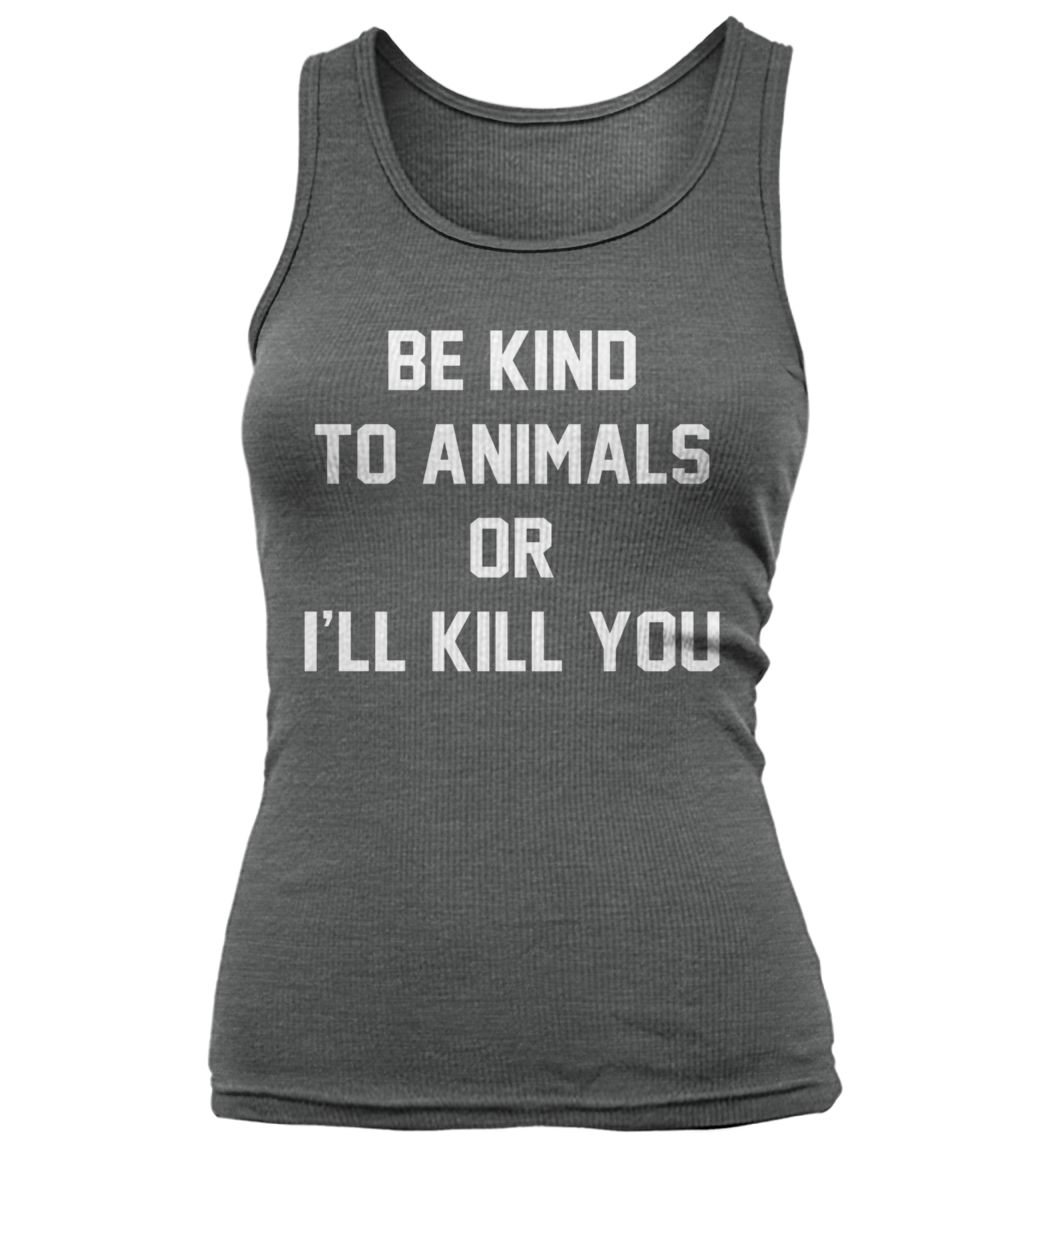 Animal rights be kind to animals or I'll kill you women's tank top